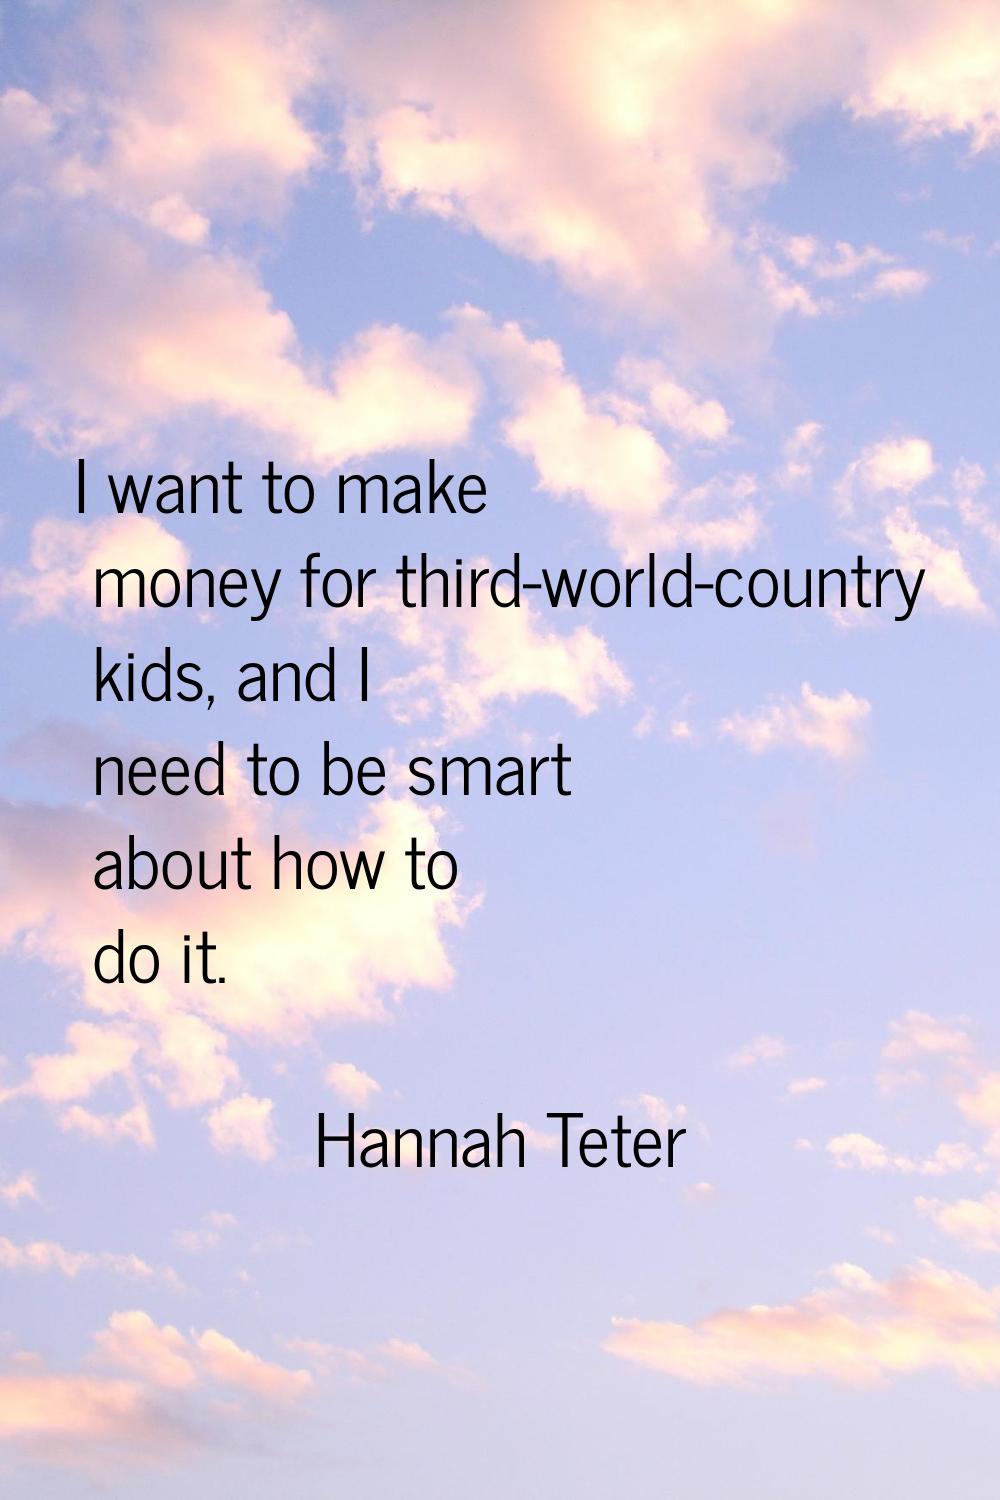 I want to make money for third-world-country kids, and I need to be smart about how to do it.